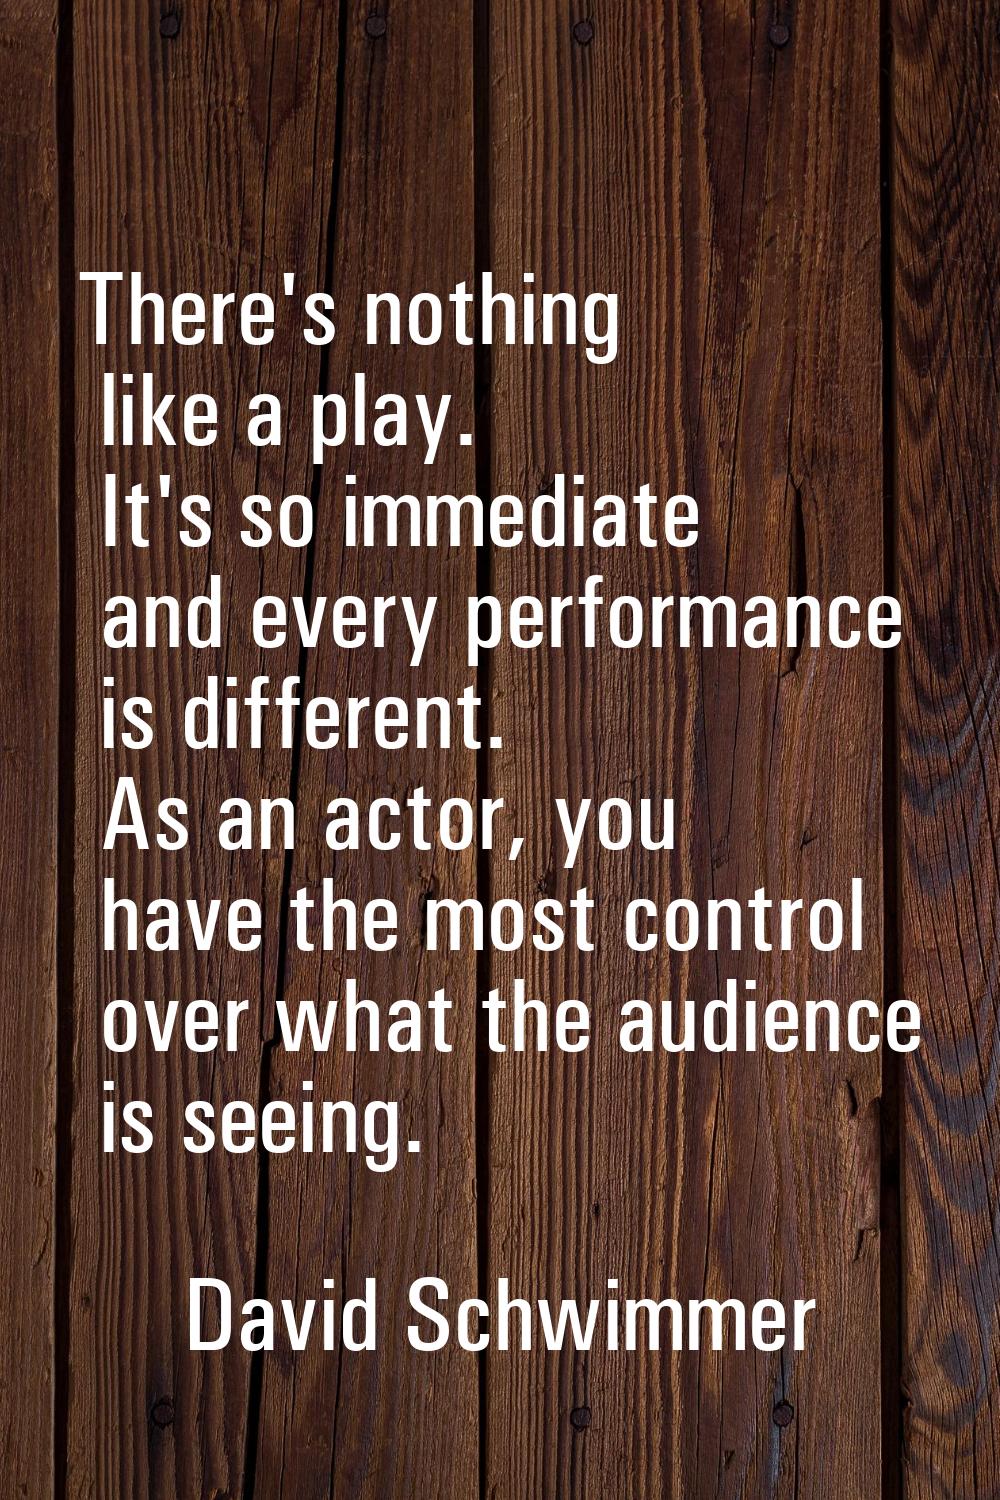 There's nothing like a play. It's so immediate and every performance is different. As an actor, you